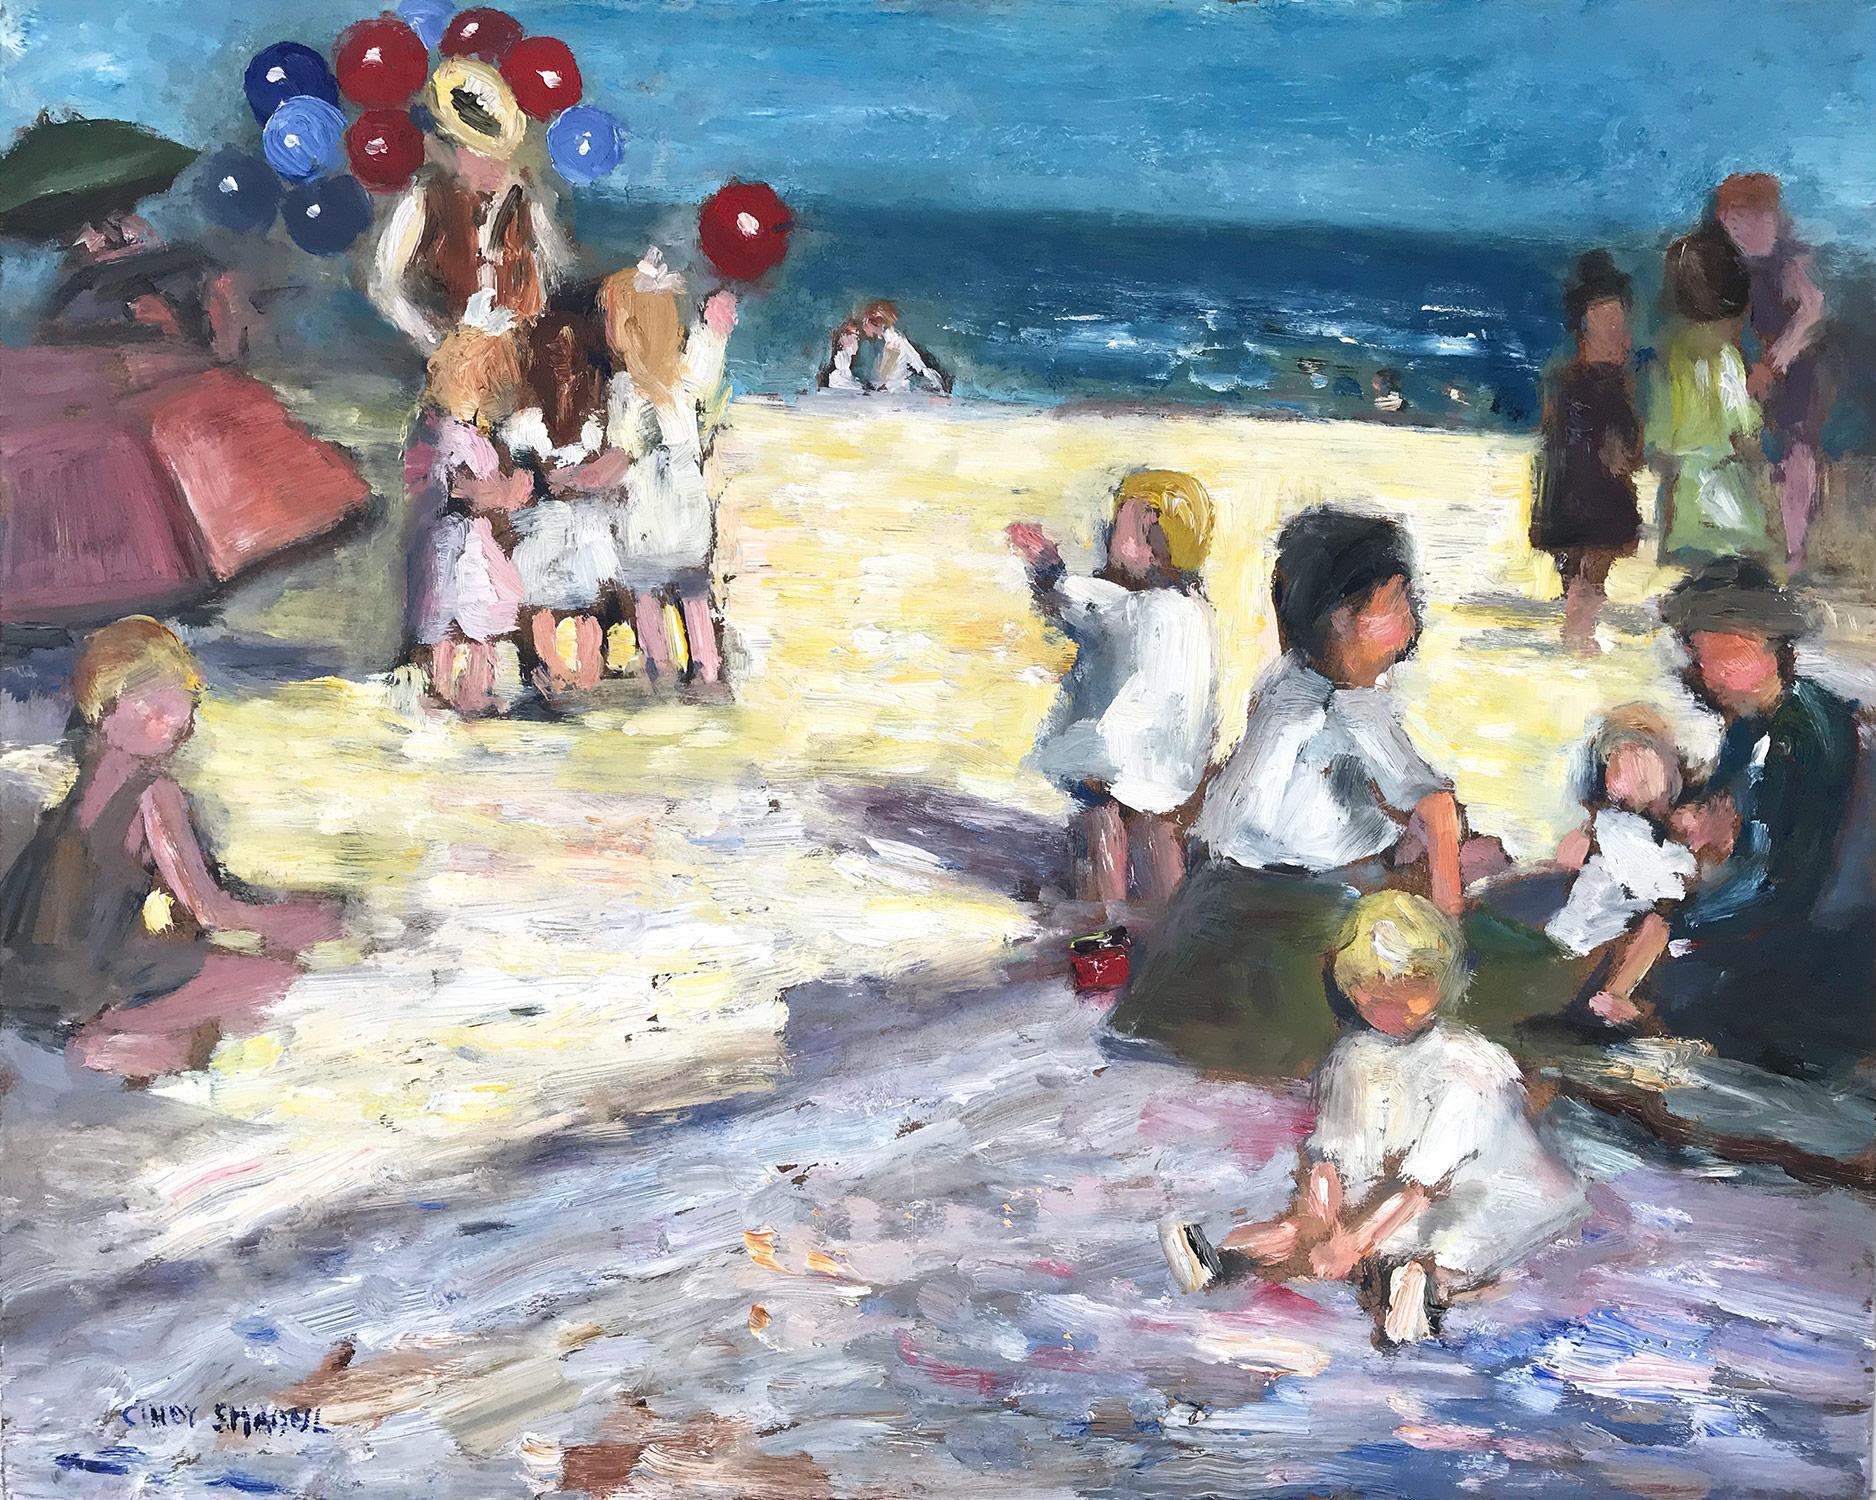 "Playing at the Beach" Impressionistic Beach Scene Oil Painting on Panel